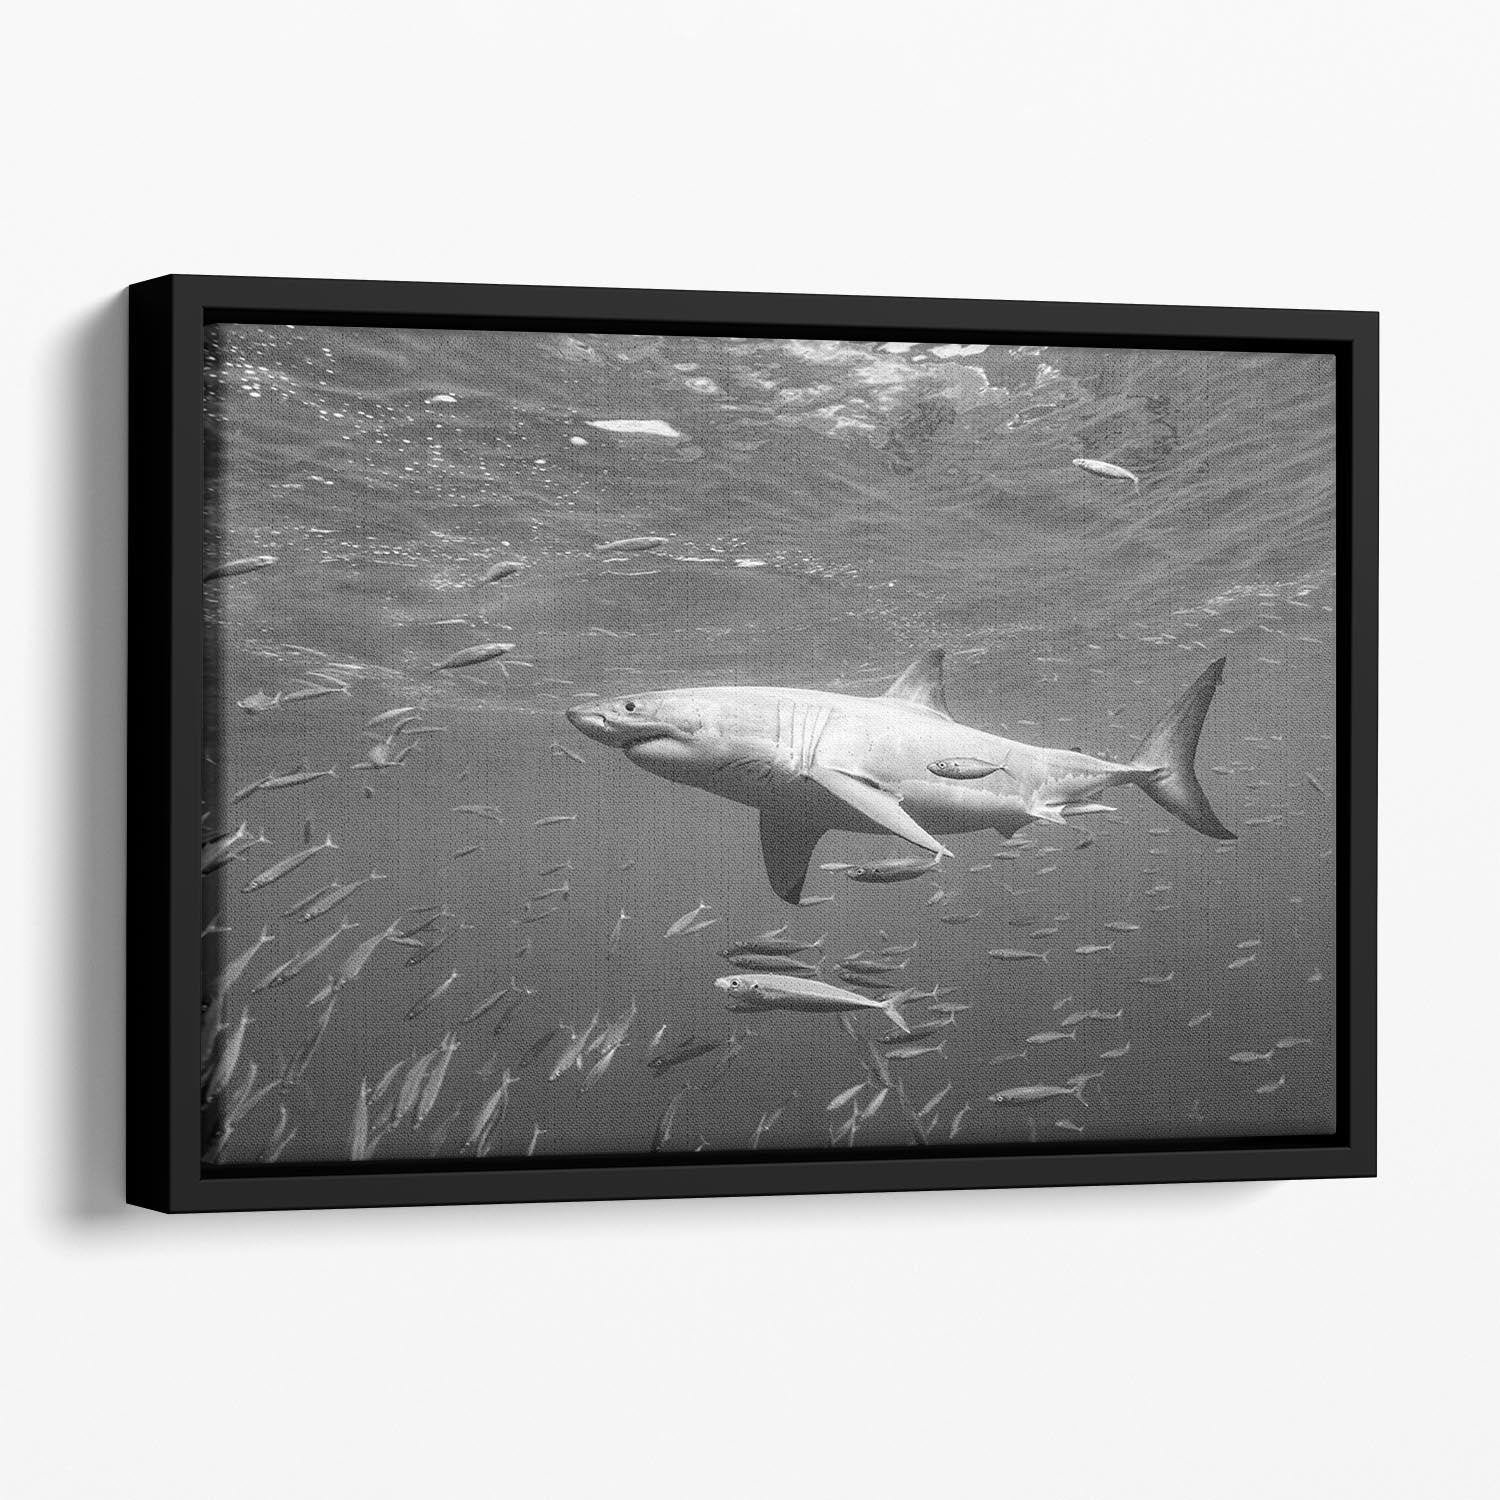 At The Surface Floating Framed Canvas - Canvas Art Rocks - 1